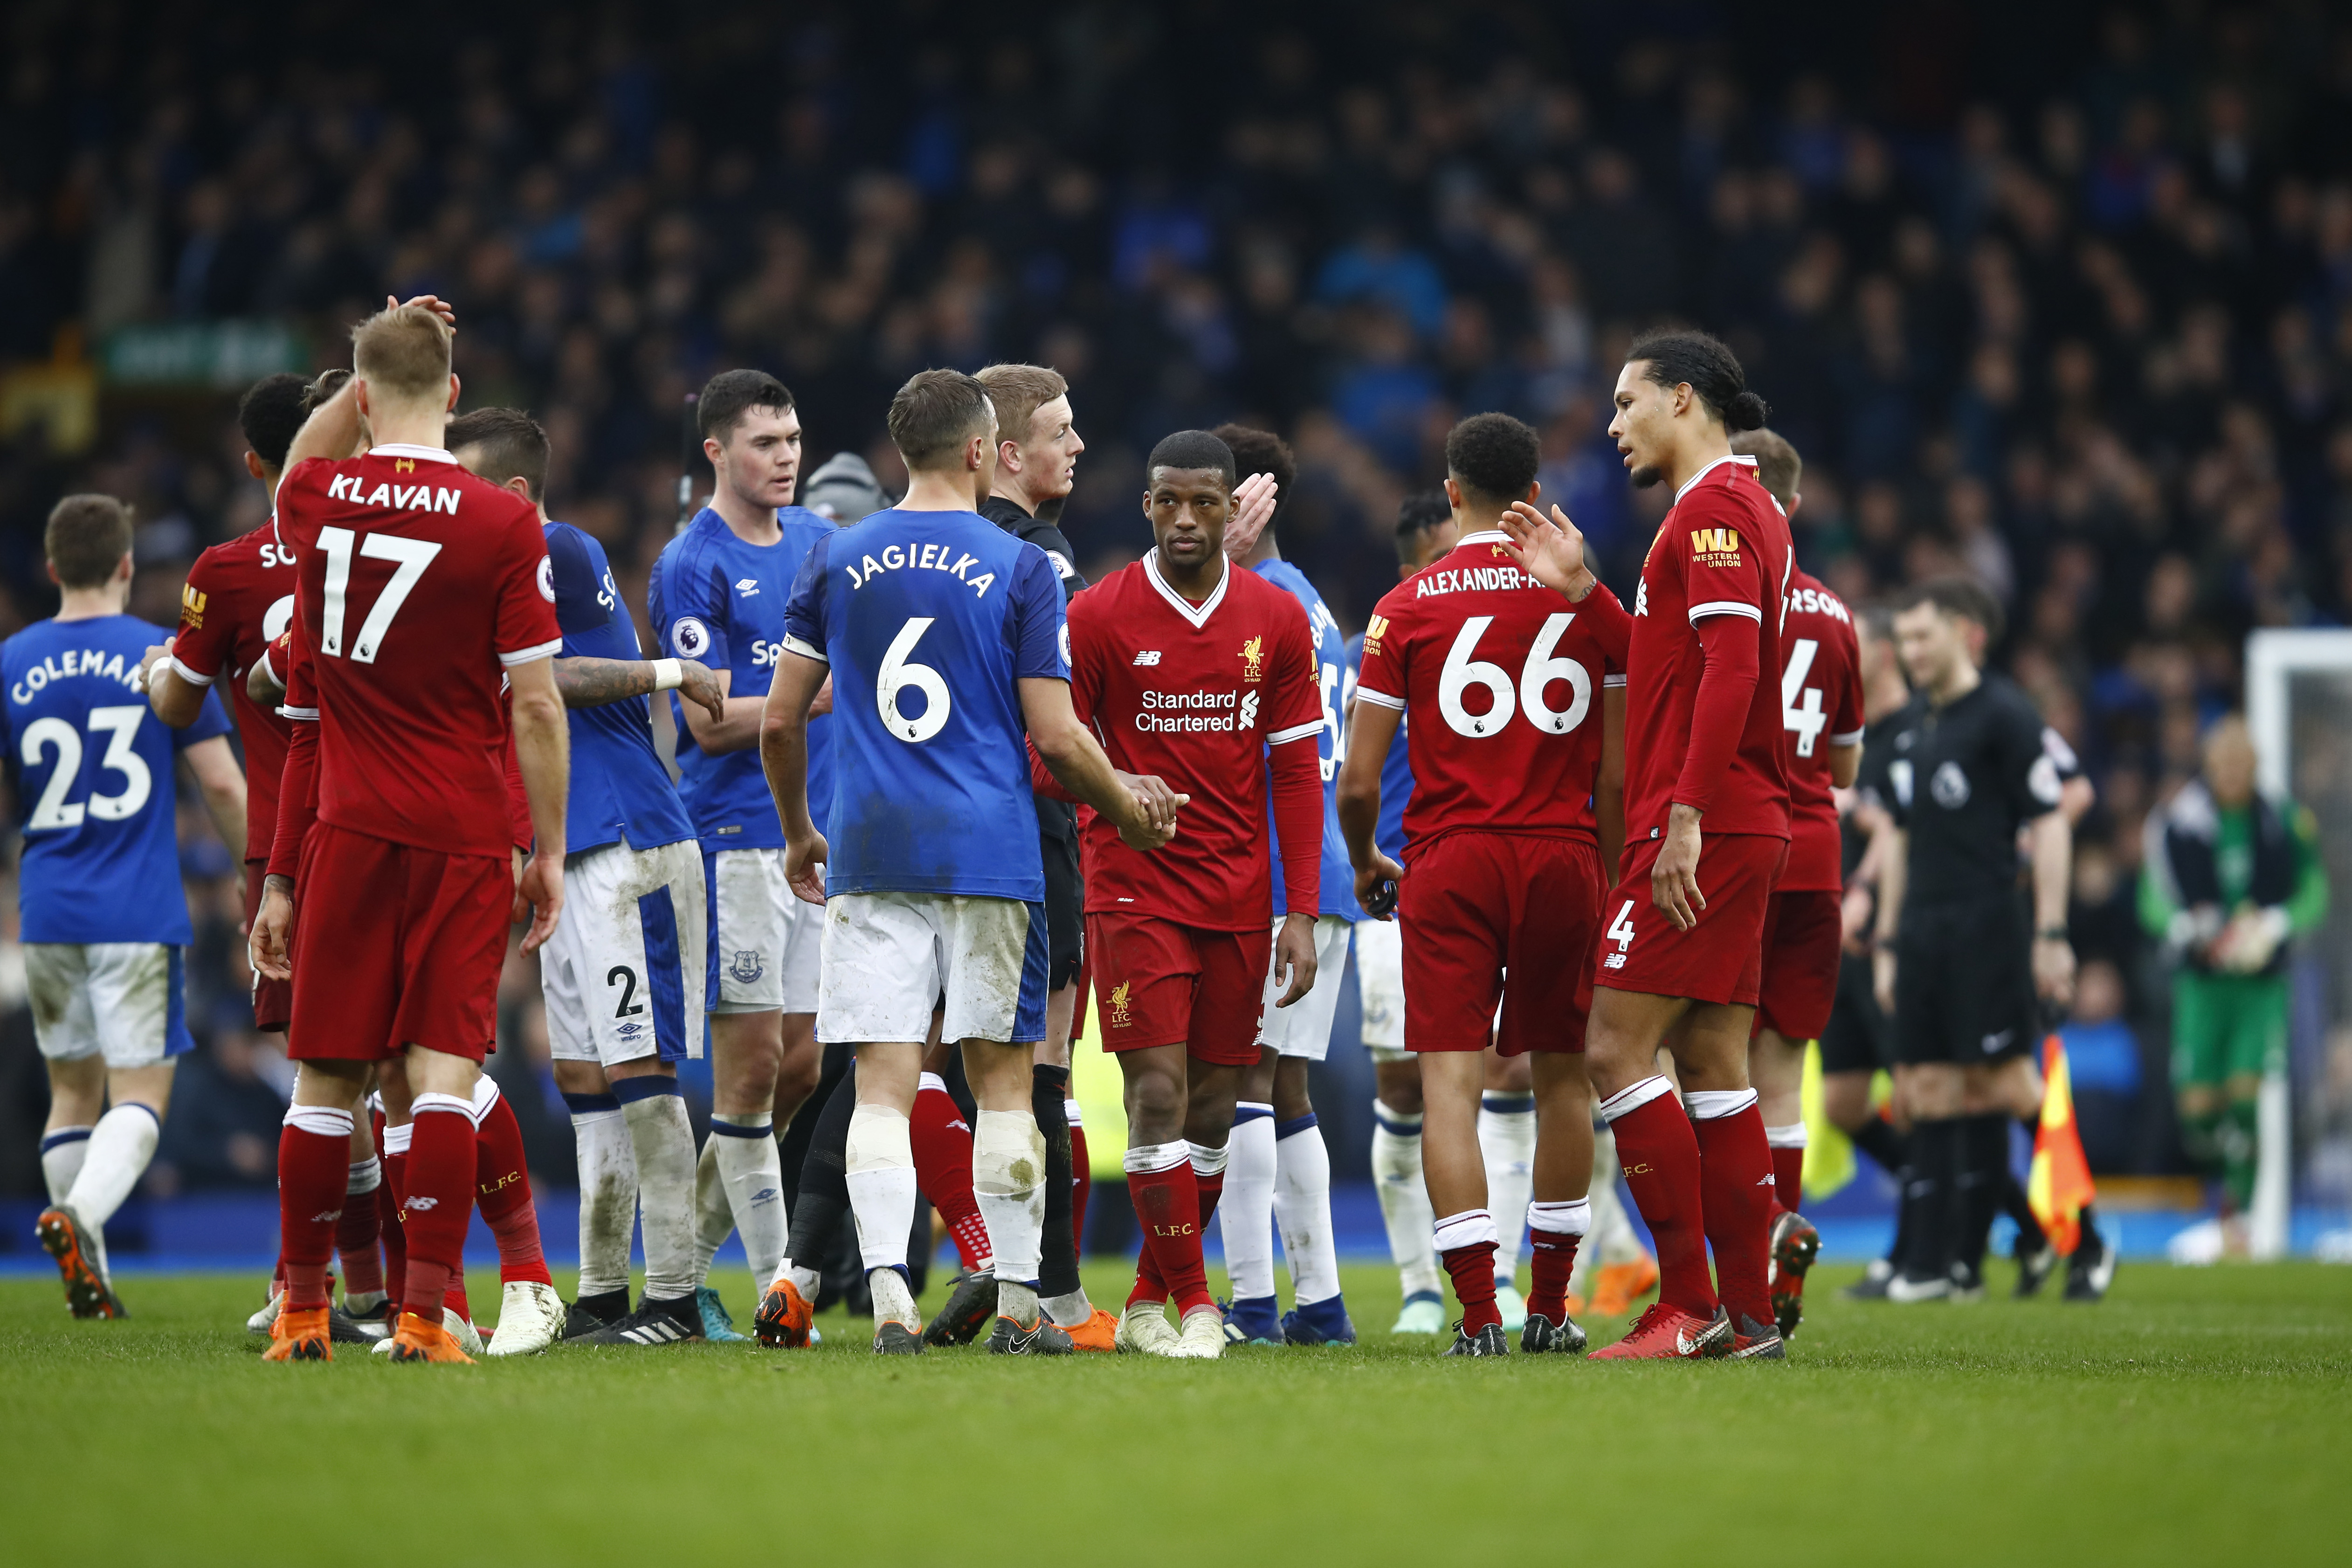 LIVERPOOL, ENGLAND - APRIL 07:  Phil Jagielka of Everton shakes hands with Georginio Wijnaldum of Liverpool after the Premier League match between Everton and Liverpool at Goodison Park on April 7, 2018 in Liverpool, England.  (Photo by Julian Finney/Getty Images)